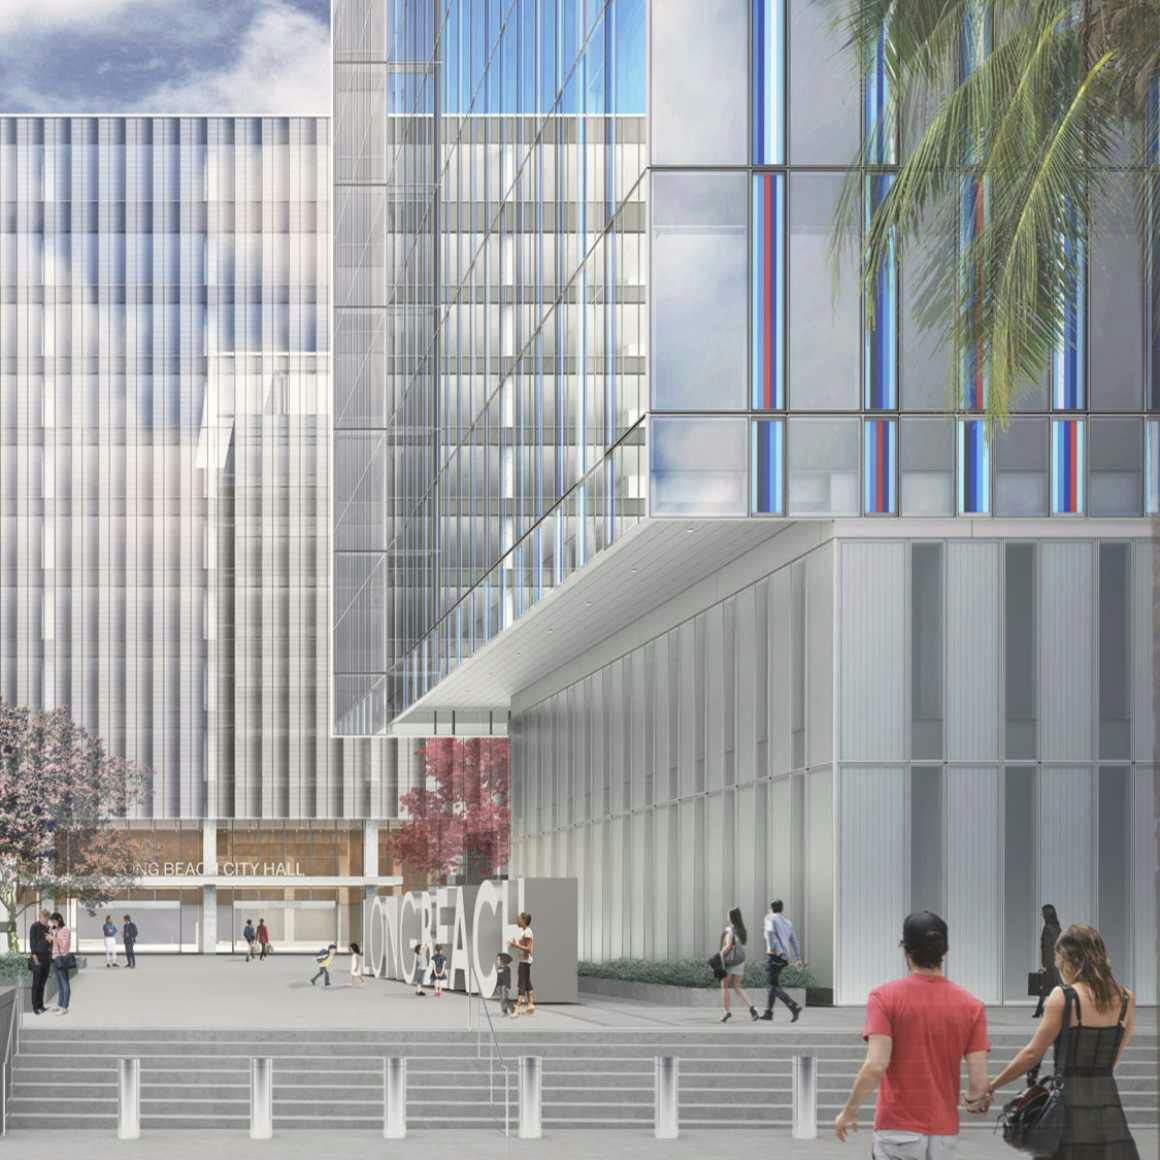 Steel work begins for the new Main Library in Long Beach image